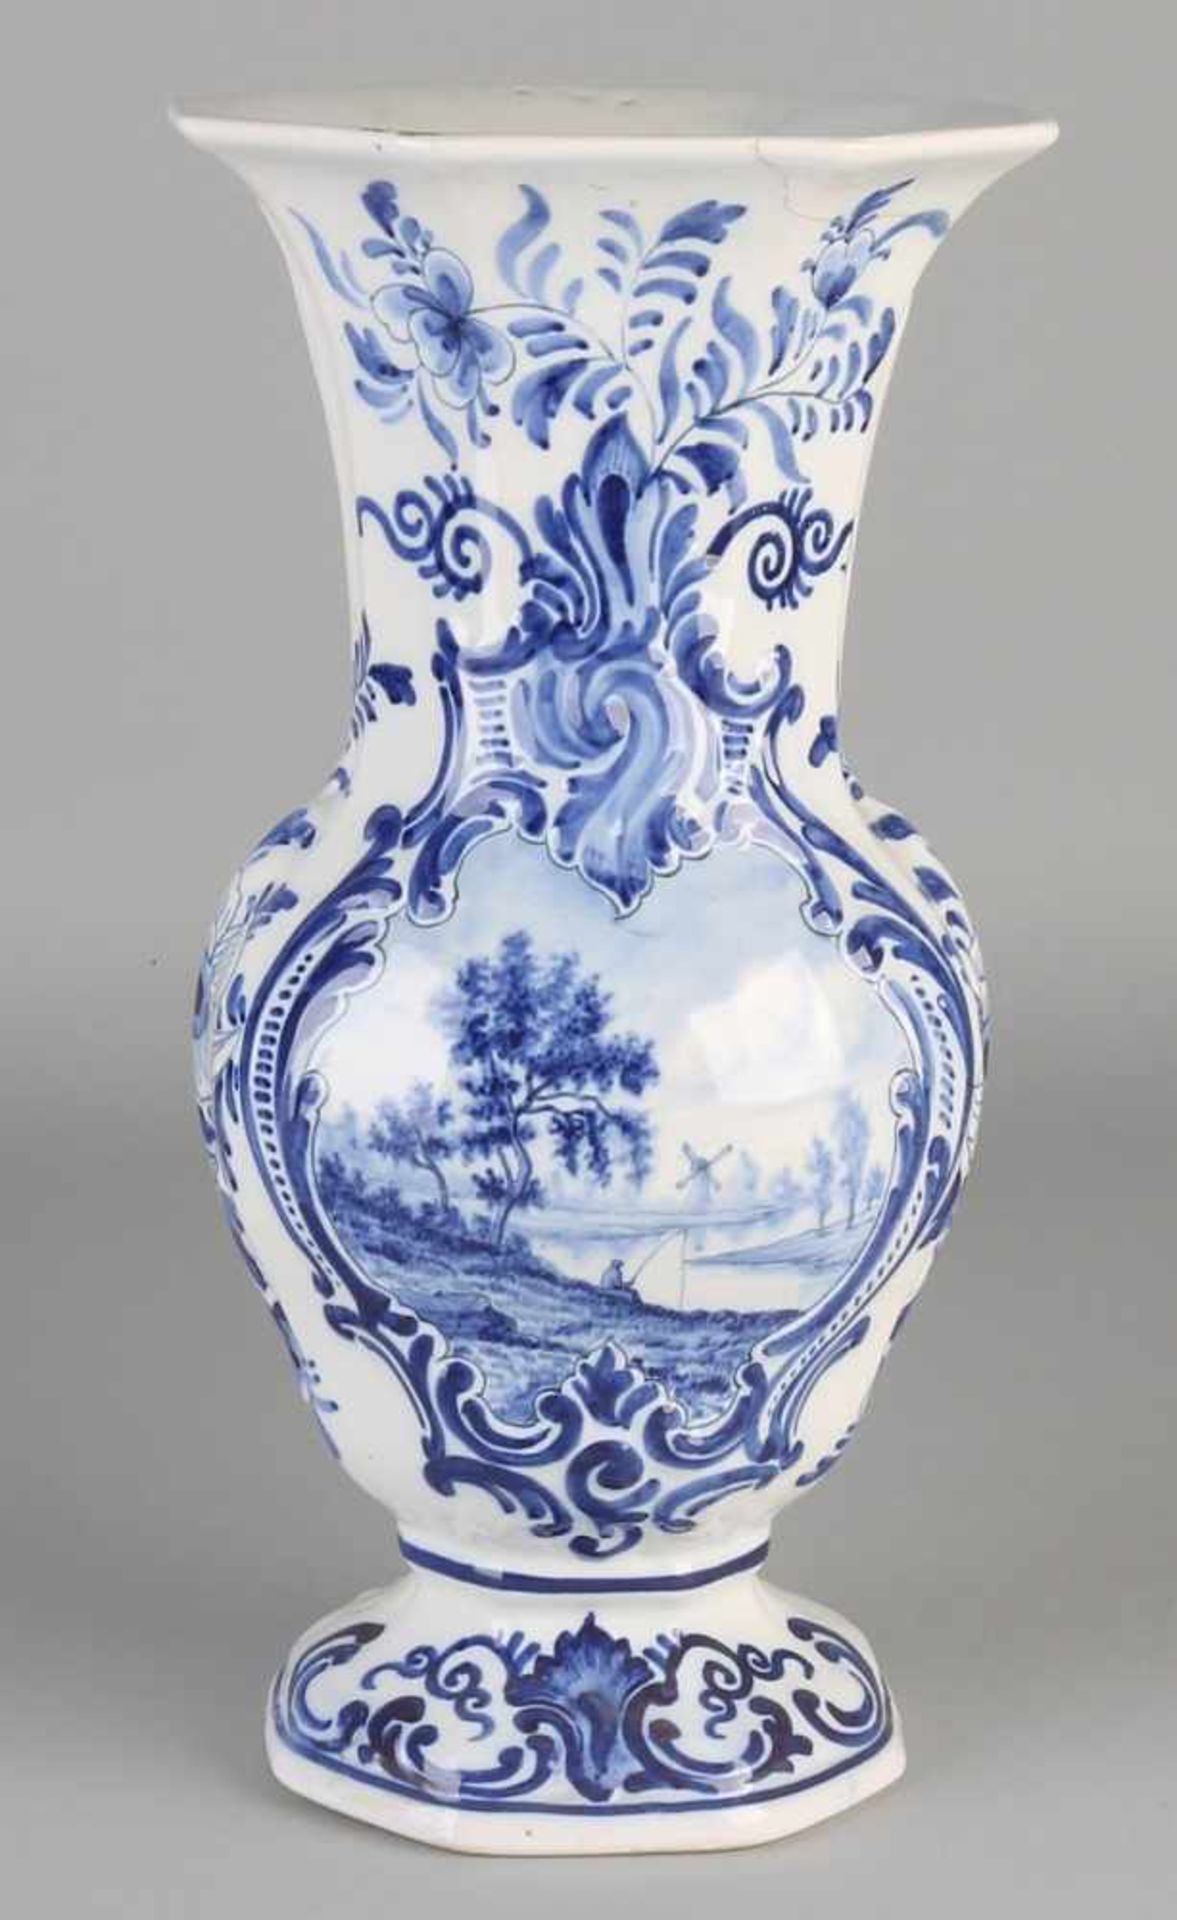 Antique Delft Fayence vase with landscape scenery. Approximately 1900. Top edge glued. Size: H 30